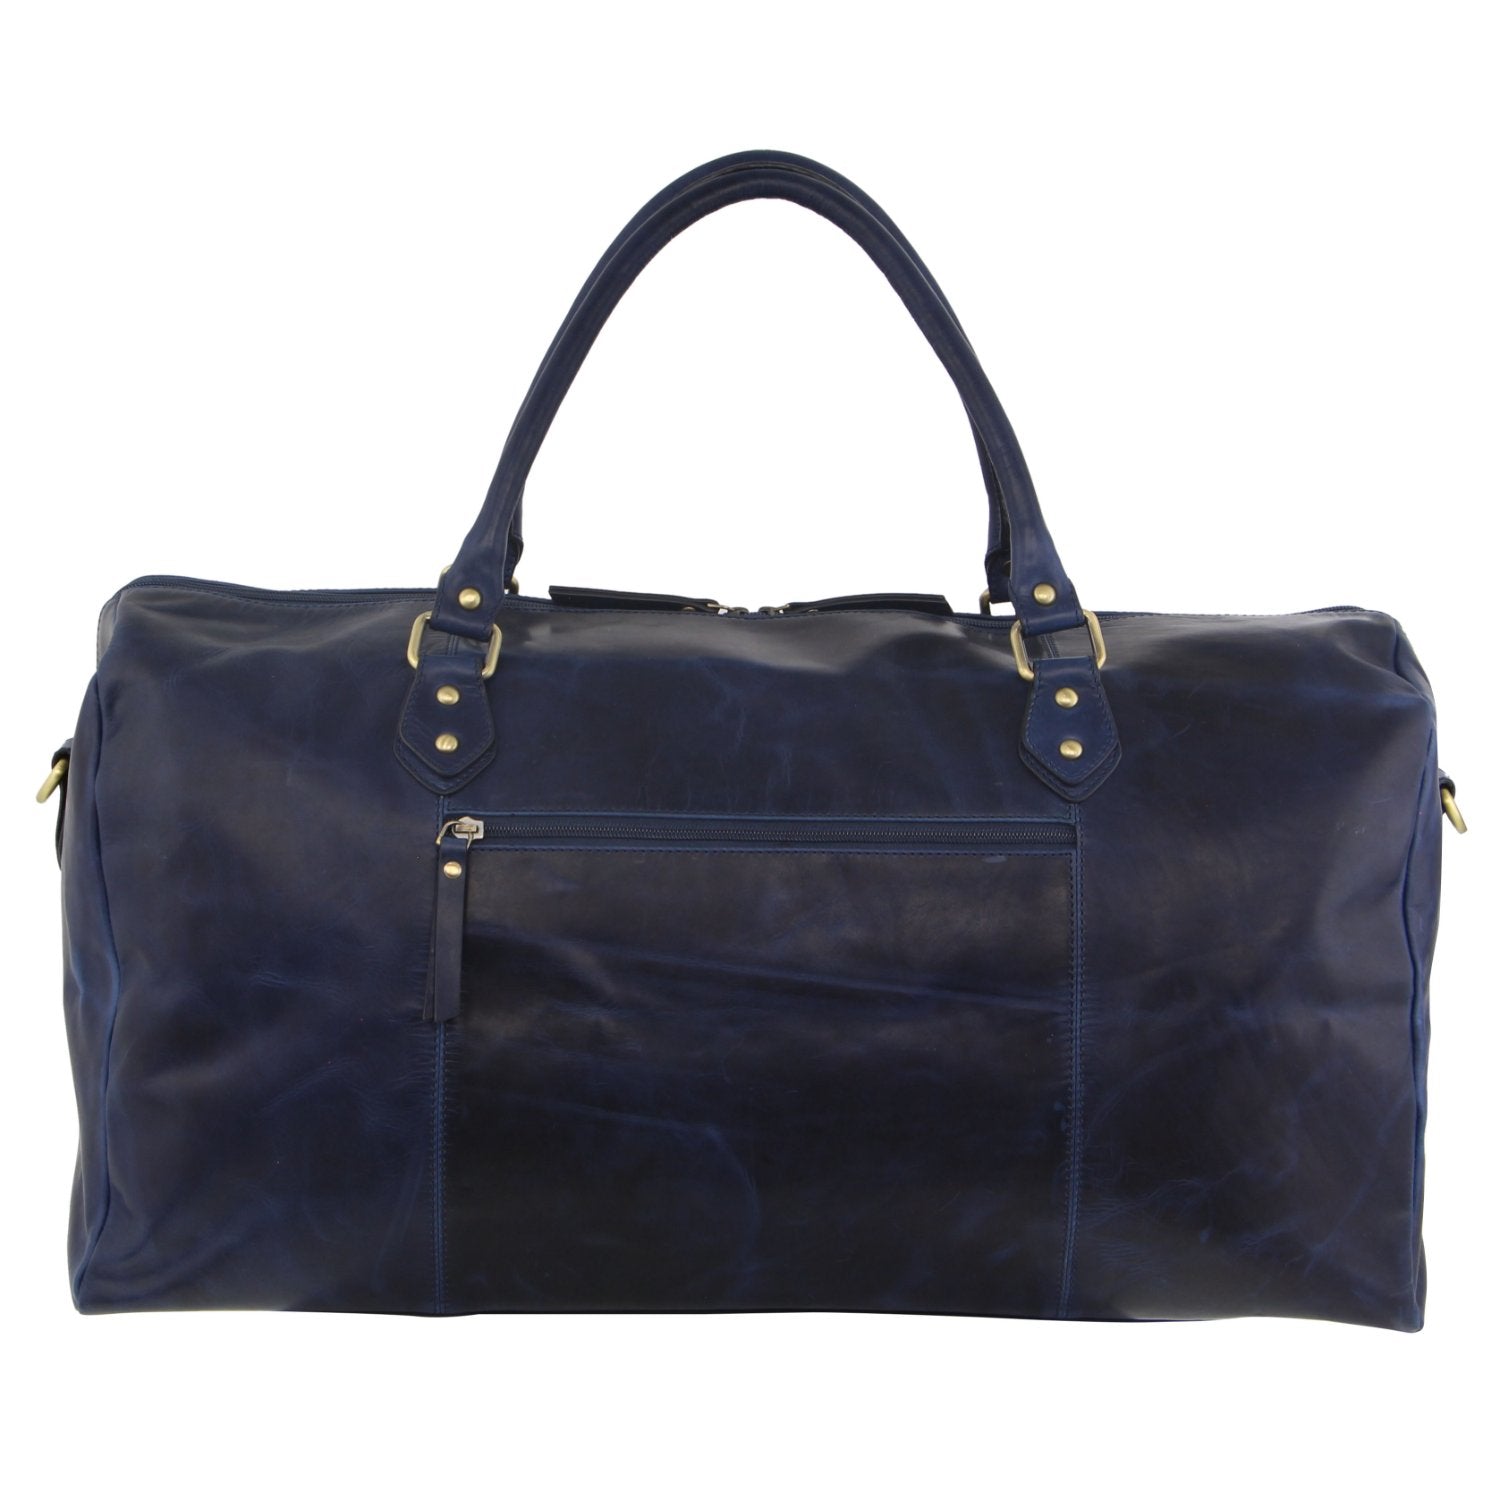 Pierre Cardin Smooth Leather Overnight Bag in Midnight